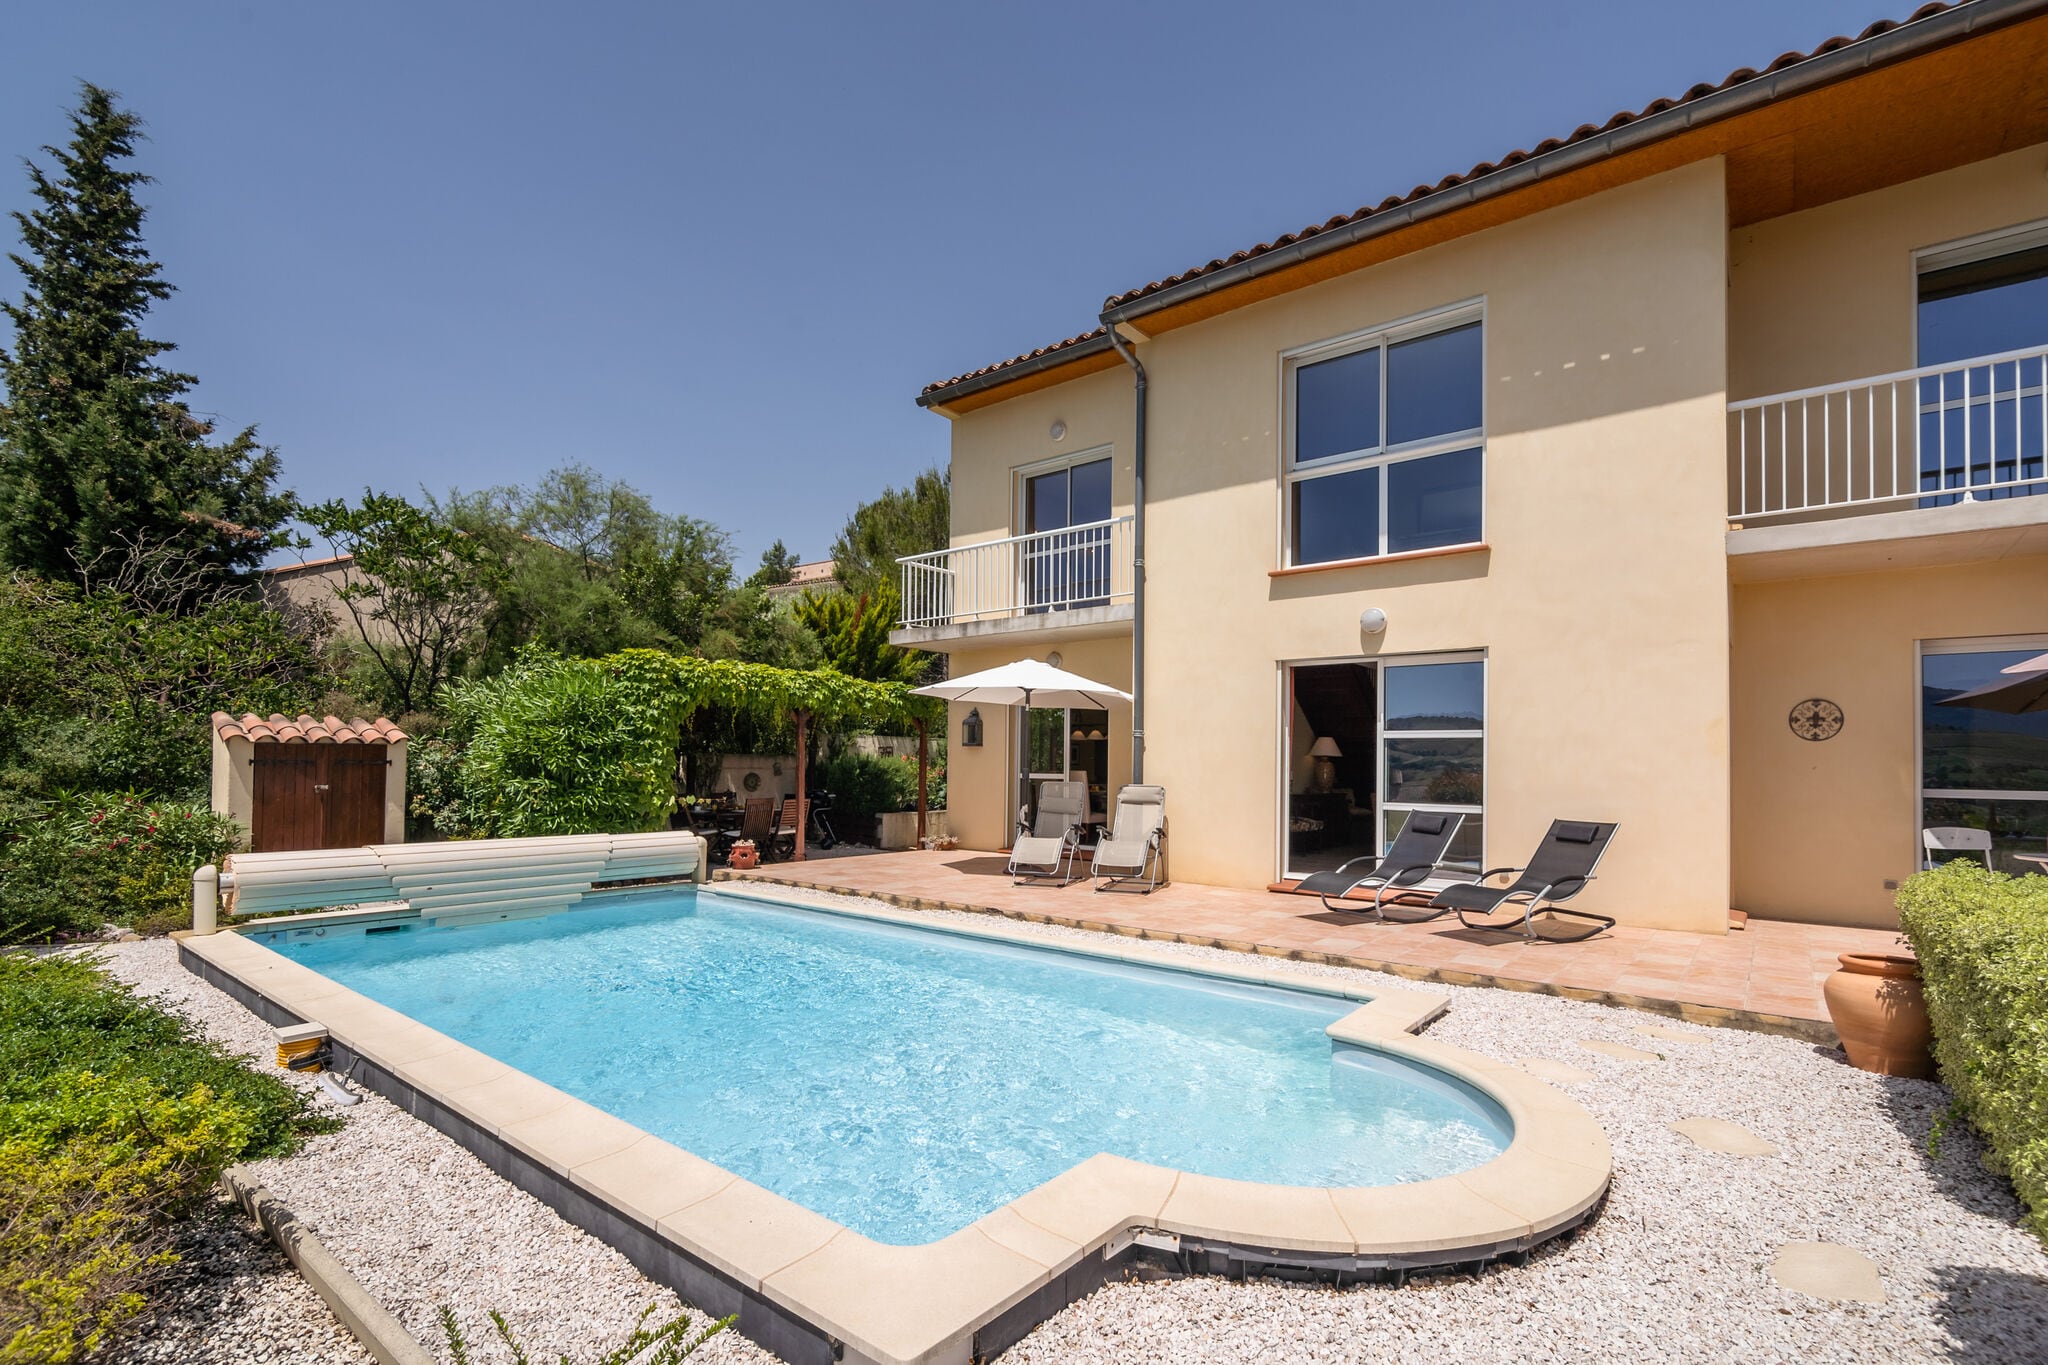 Spacious villa with private swimming pool and fully enclosed garden.